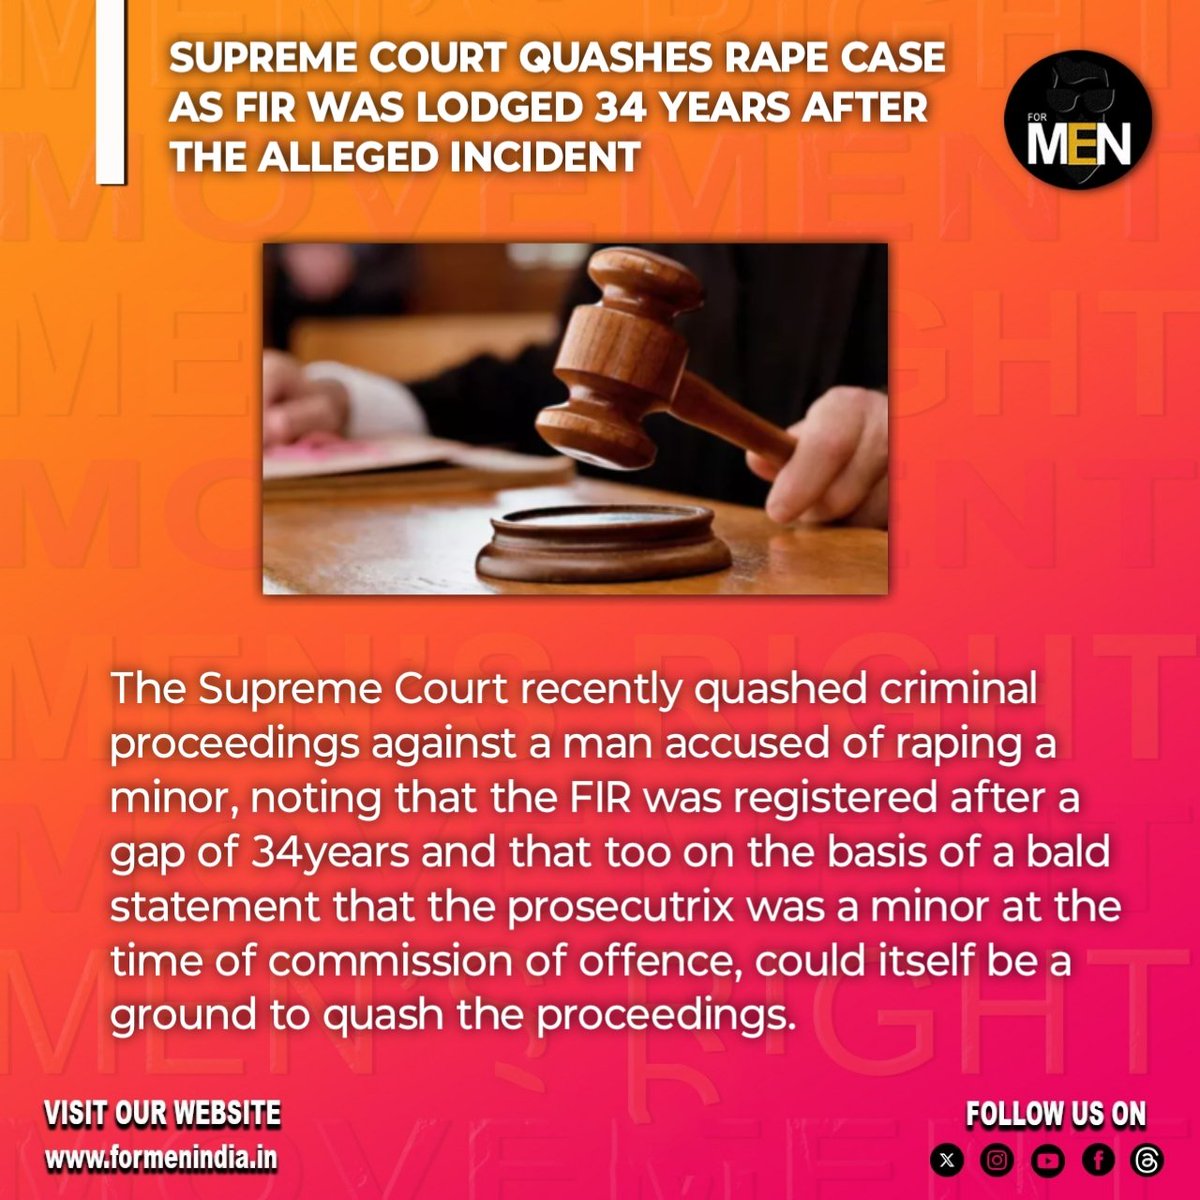 Case Title: Suresh Garodia v. The State of Assam and another

SHARE & FOLLOW FOR MORE SUCH NEWS

#formenindia #mentoo #men #law #indianlaw